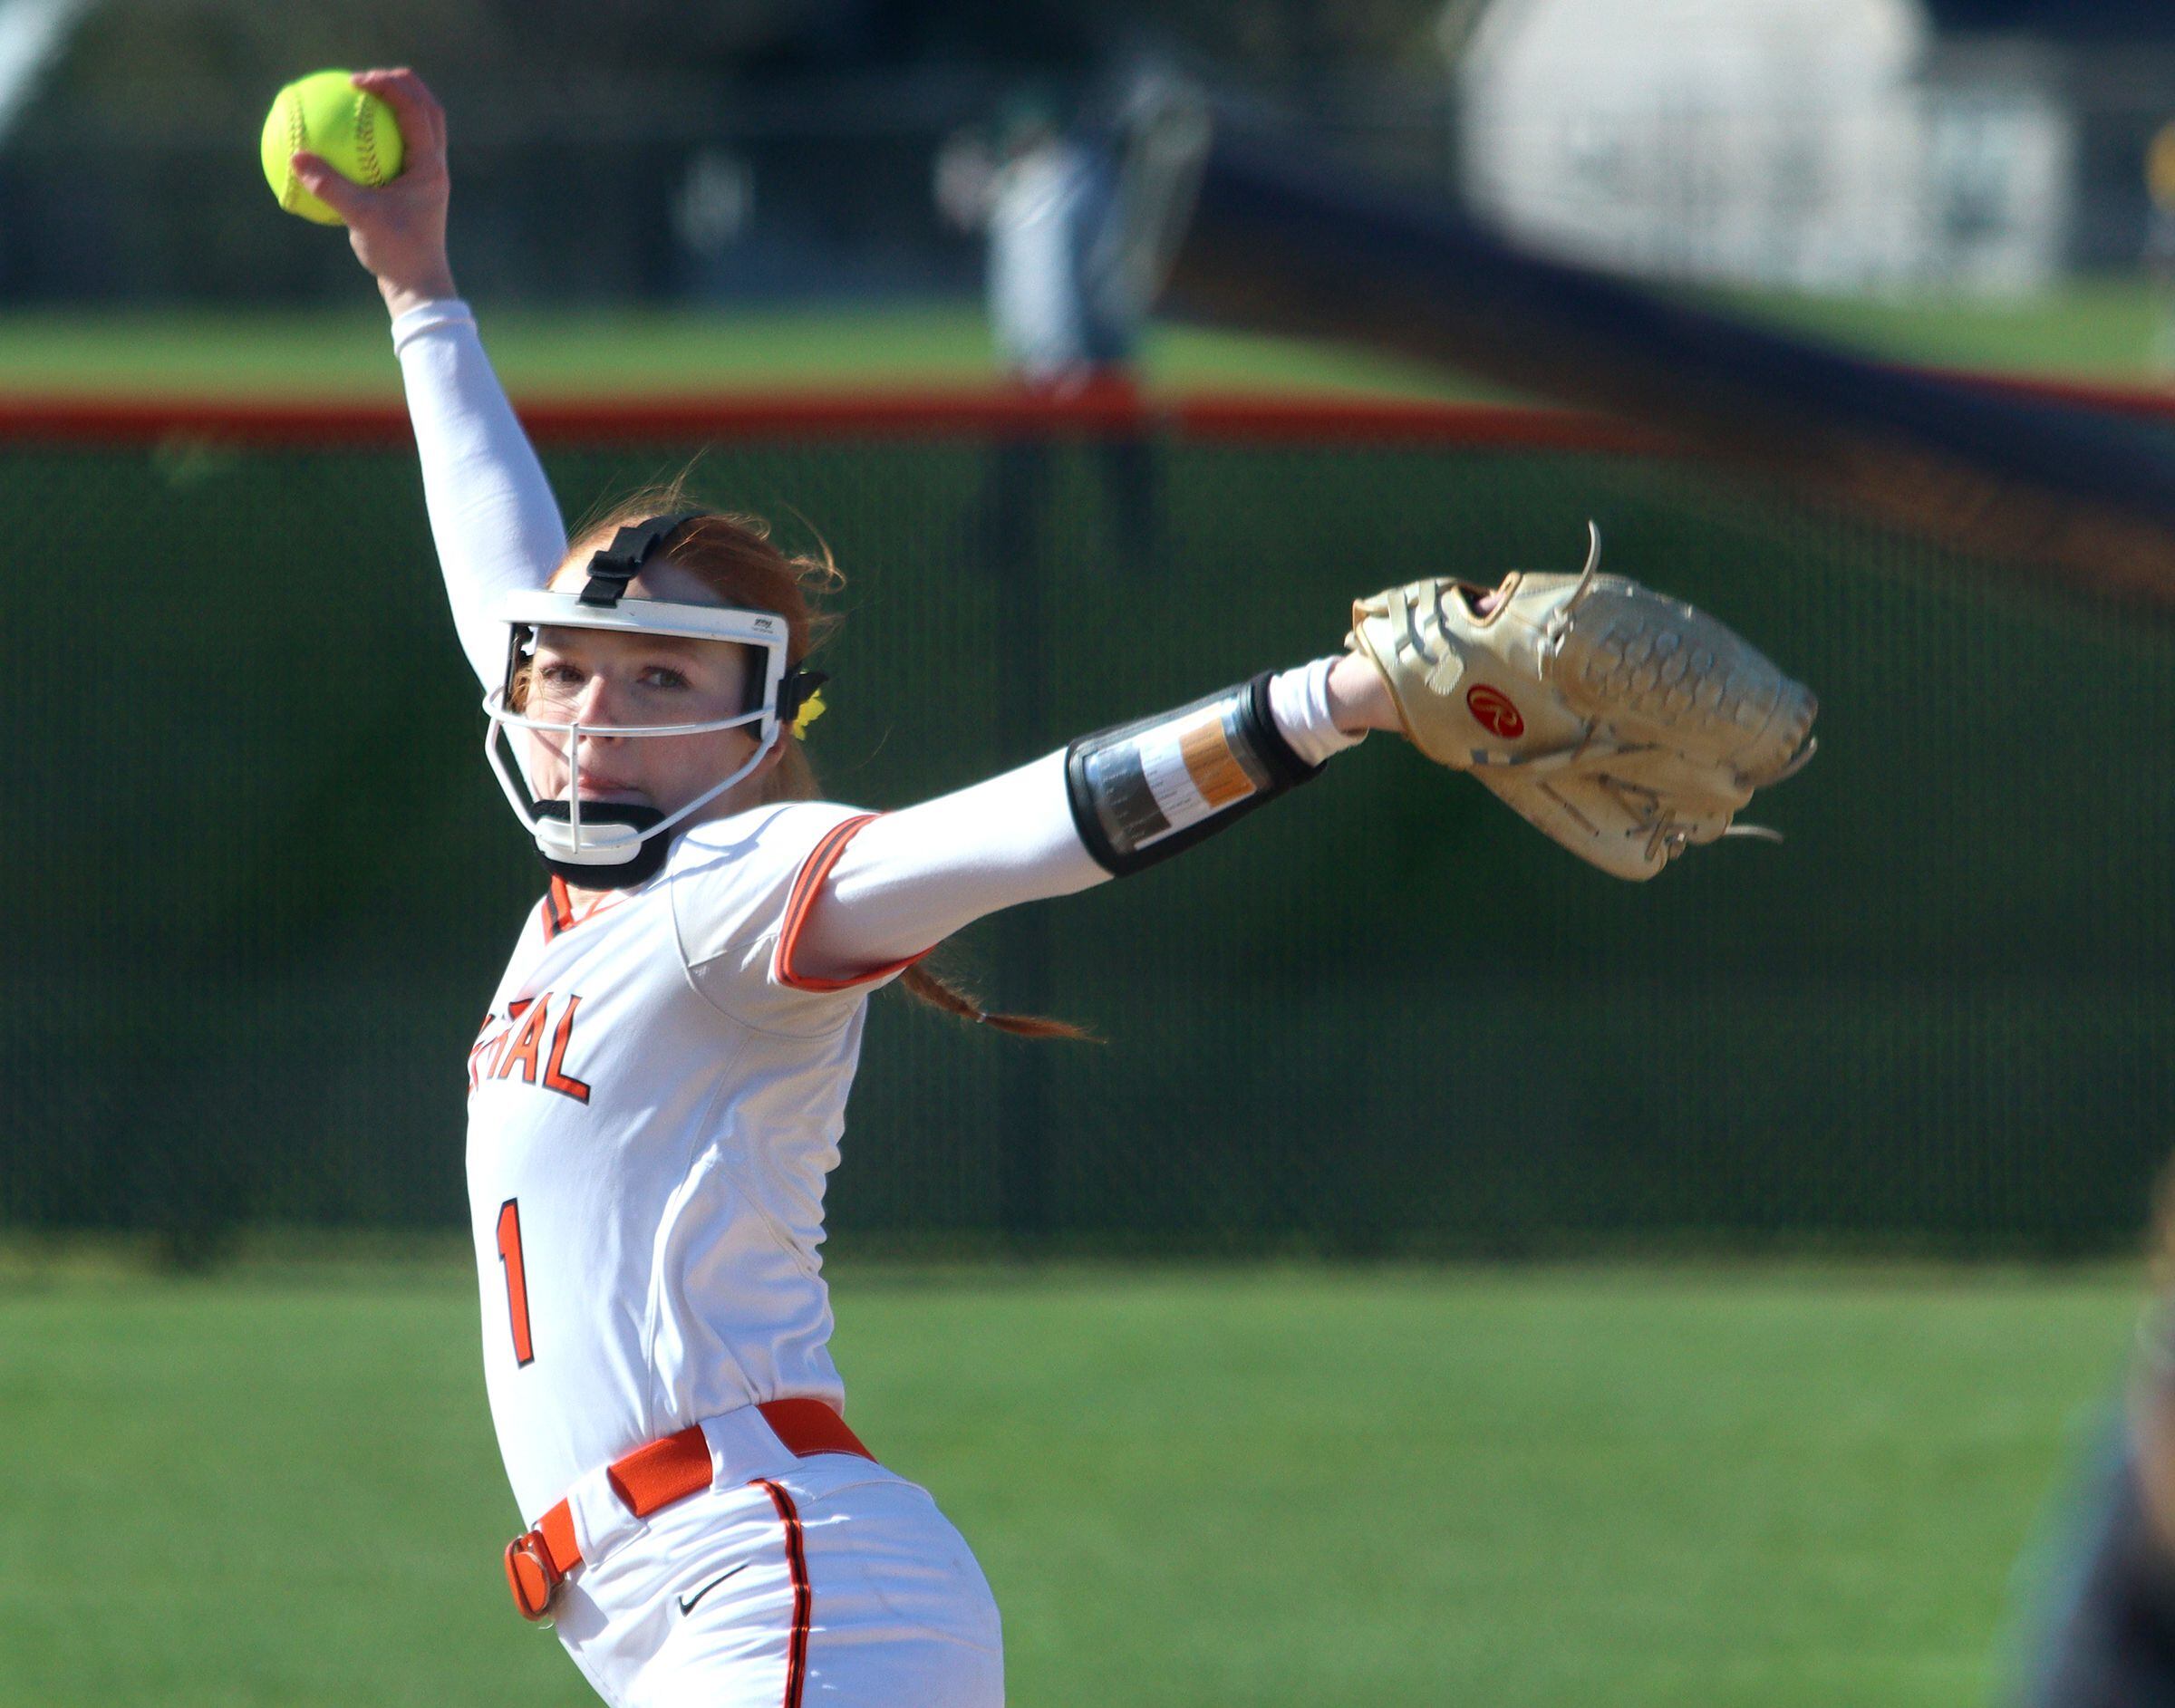 Crystal Lake Central’s Makayla Malone delivers a pitch against Woodstock North Friday in Crystal Lake.